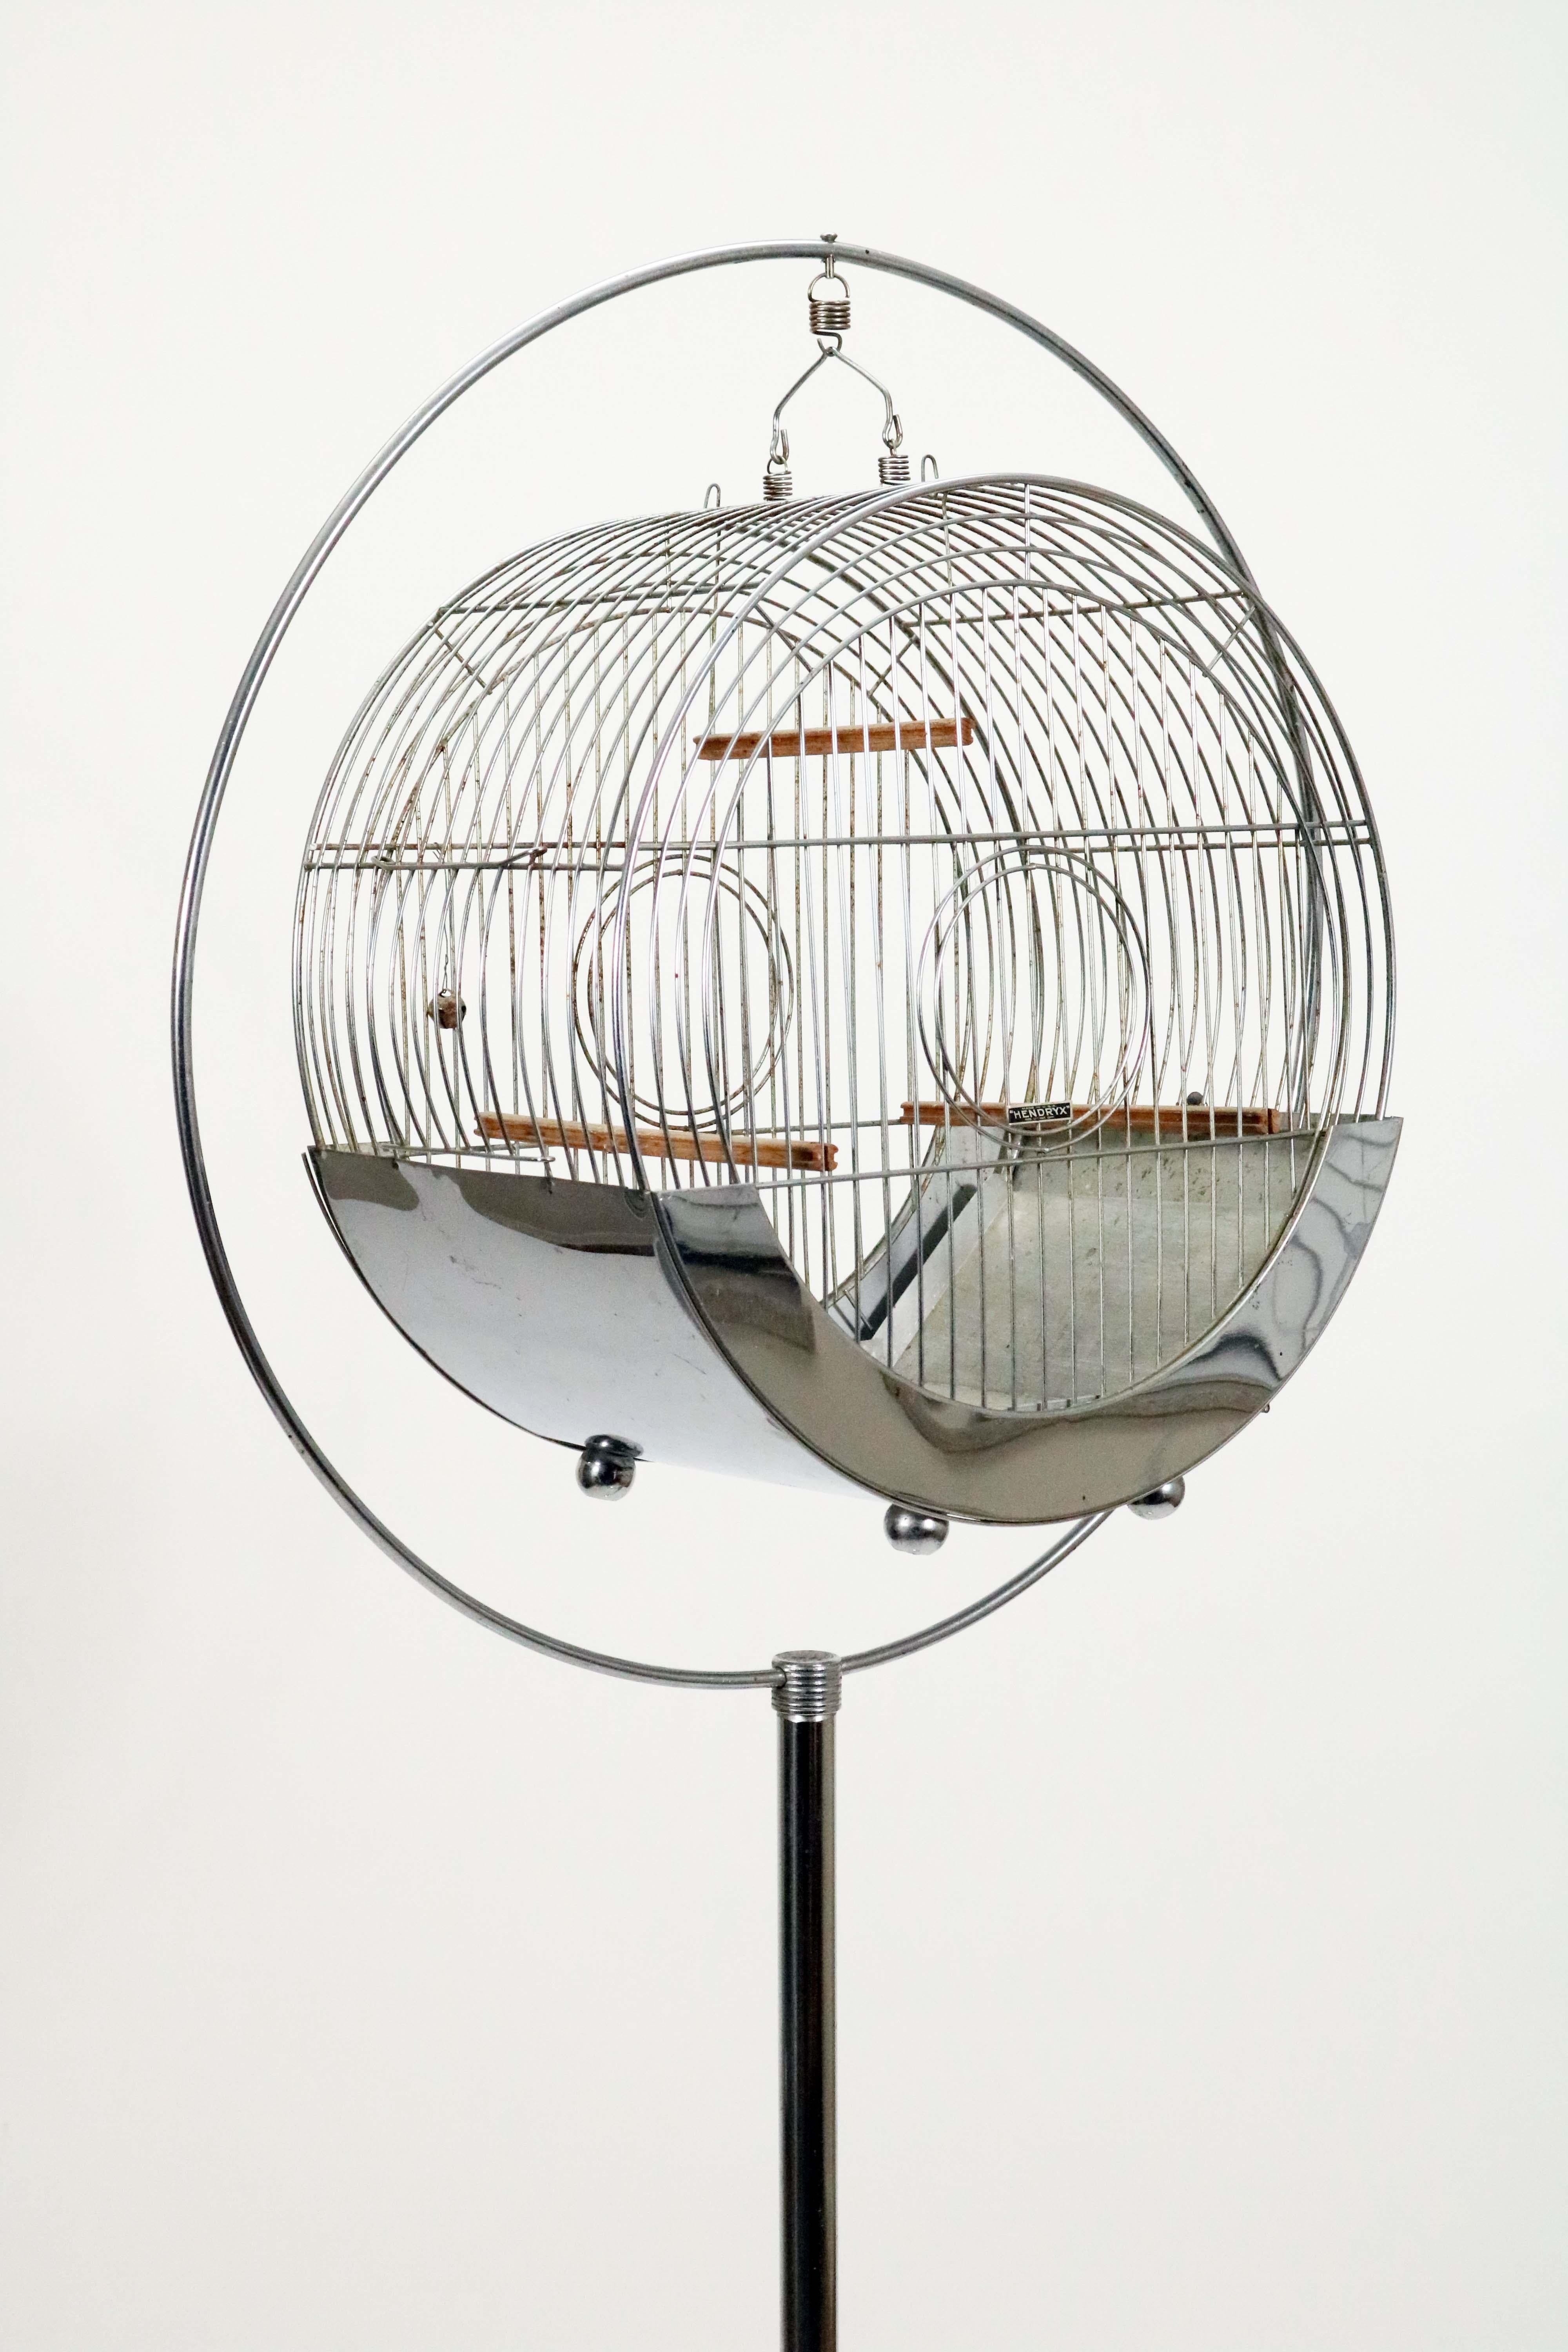 Beautiful Art Deco chrome bird cage and stand by Hendryx, circa 1930s. The cage separates from the stand so you can place on a table top. Even if you don't have a bird, this piece is a virtual piece of art!

Dimensions for the cage are 16.5